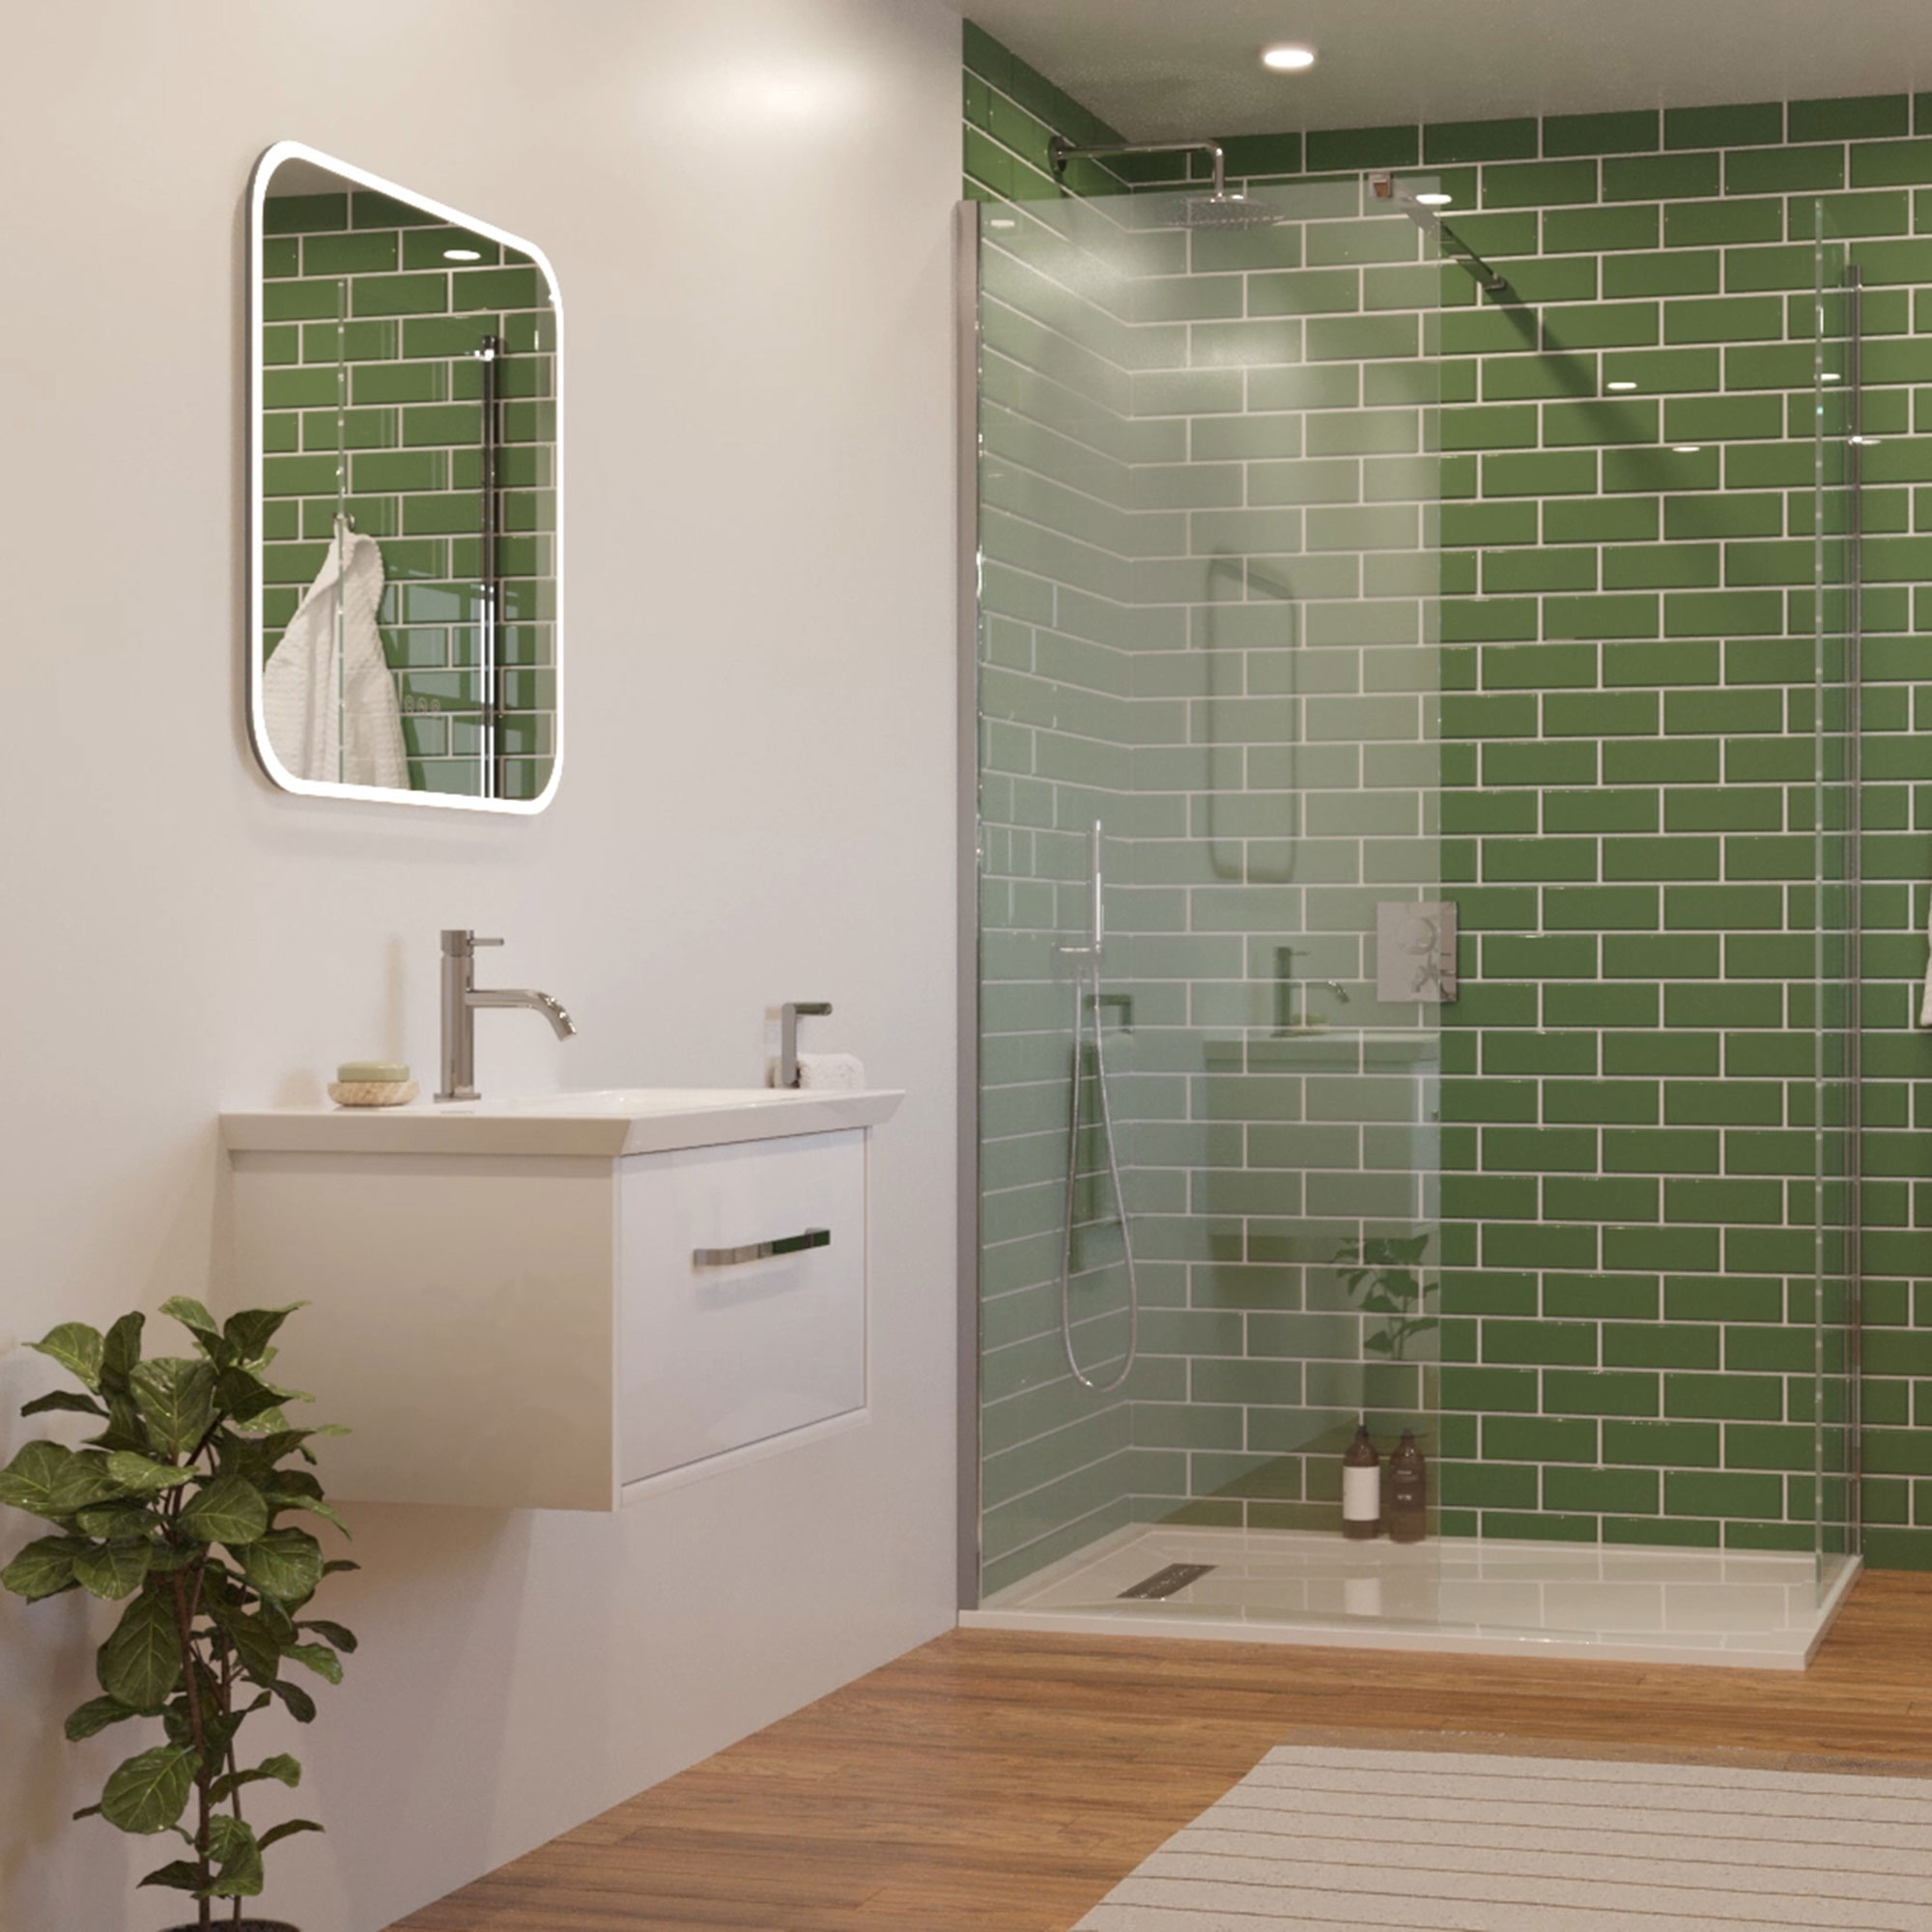 Bathroom with white paint and green tiles in walk in shower